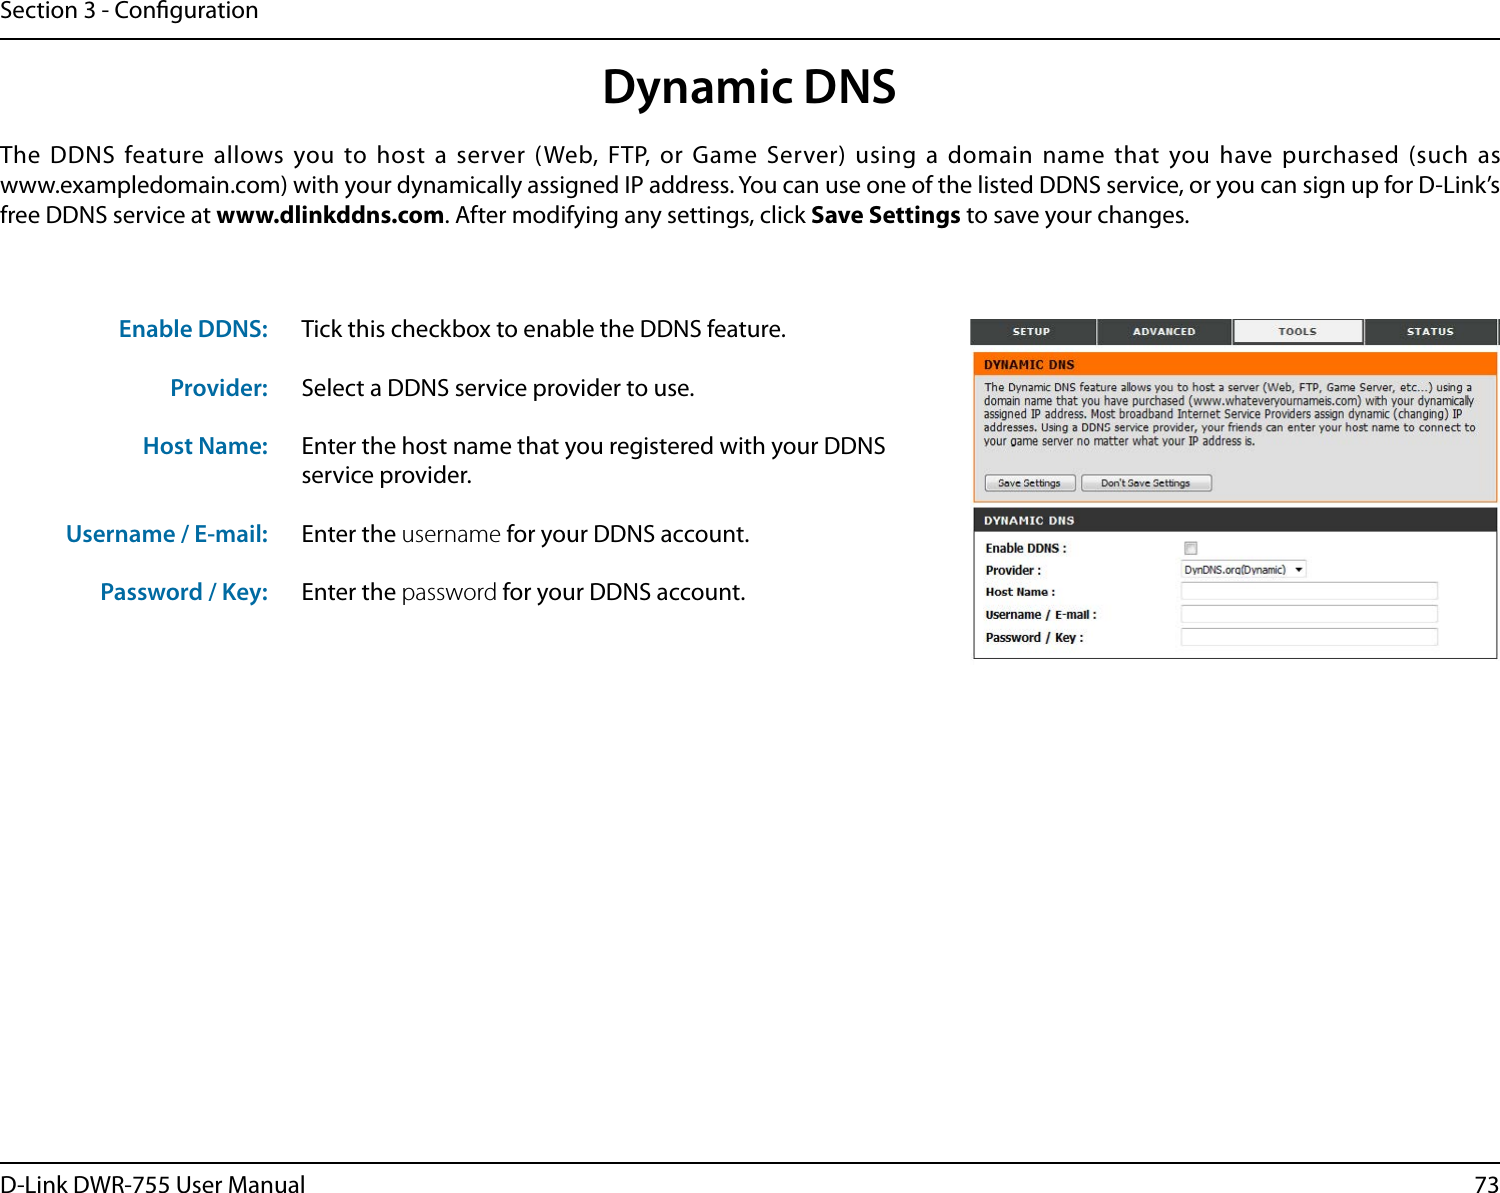 73D-Link DWR-755 User ManualSection 3 - CongurationDynamic DNSTick this checkbox to enable the DDNS feature.Select a DDNS service provider to use.Enter the host name that you registered with your DDNS service provider.Enter the username for your DDNS account.Enter the password for your DDNS account.The DDNS feature allows you to host a server (Web, FTP, or Game Server) using a domain name that you have purchased (such as  www.exampledomain.com) with your dynamically assigned IP address. You can use one of the listed DDNS service, or you can sign up for D-Link’s free DDNS service at www.dlinkddns.com. After modifying any settings, click Save Settings to save your changes.Enable DDNS:Provider: Host Name:Username / E-mail: Password / Key: